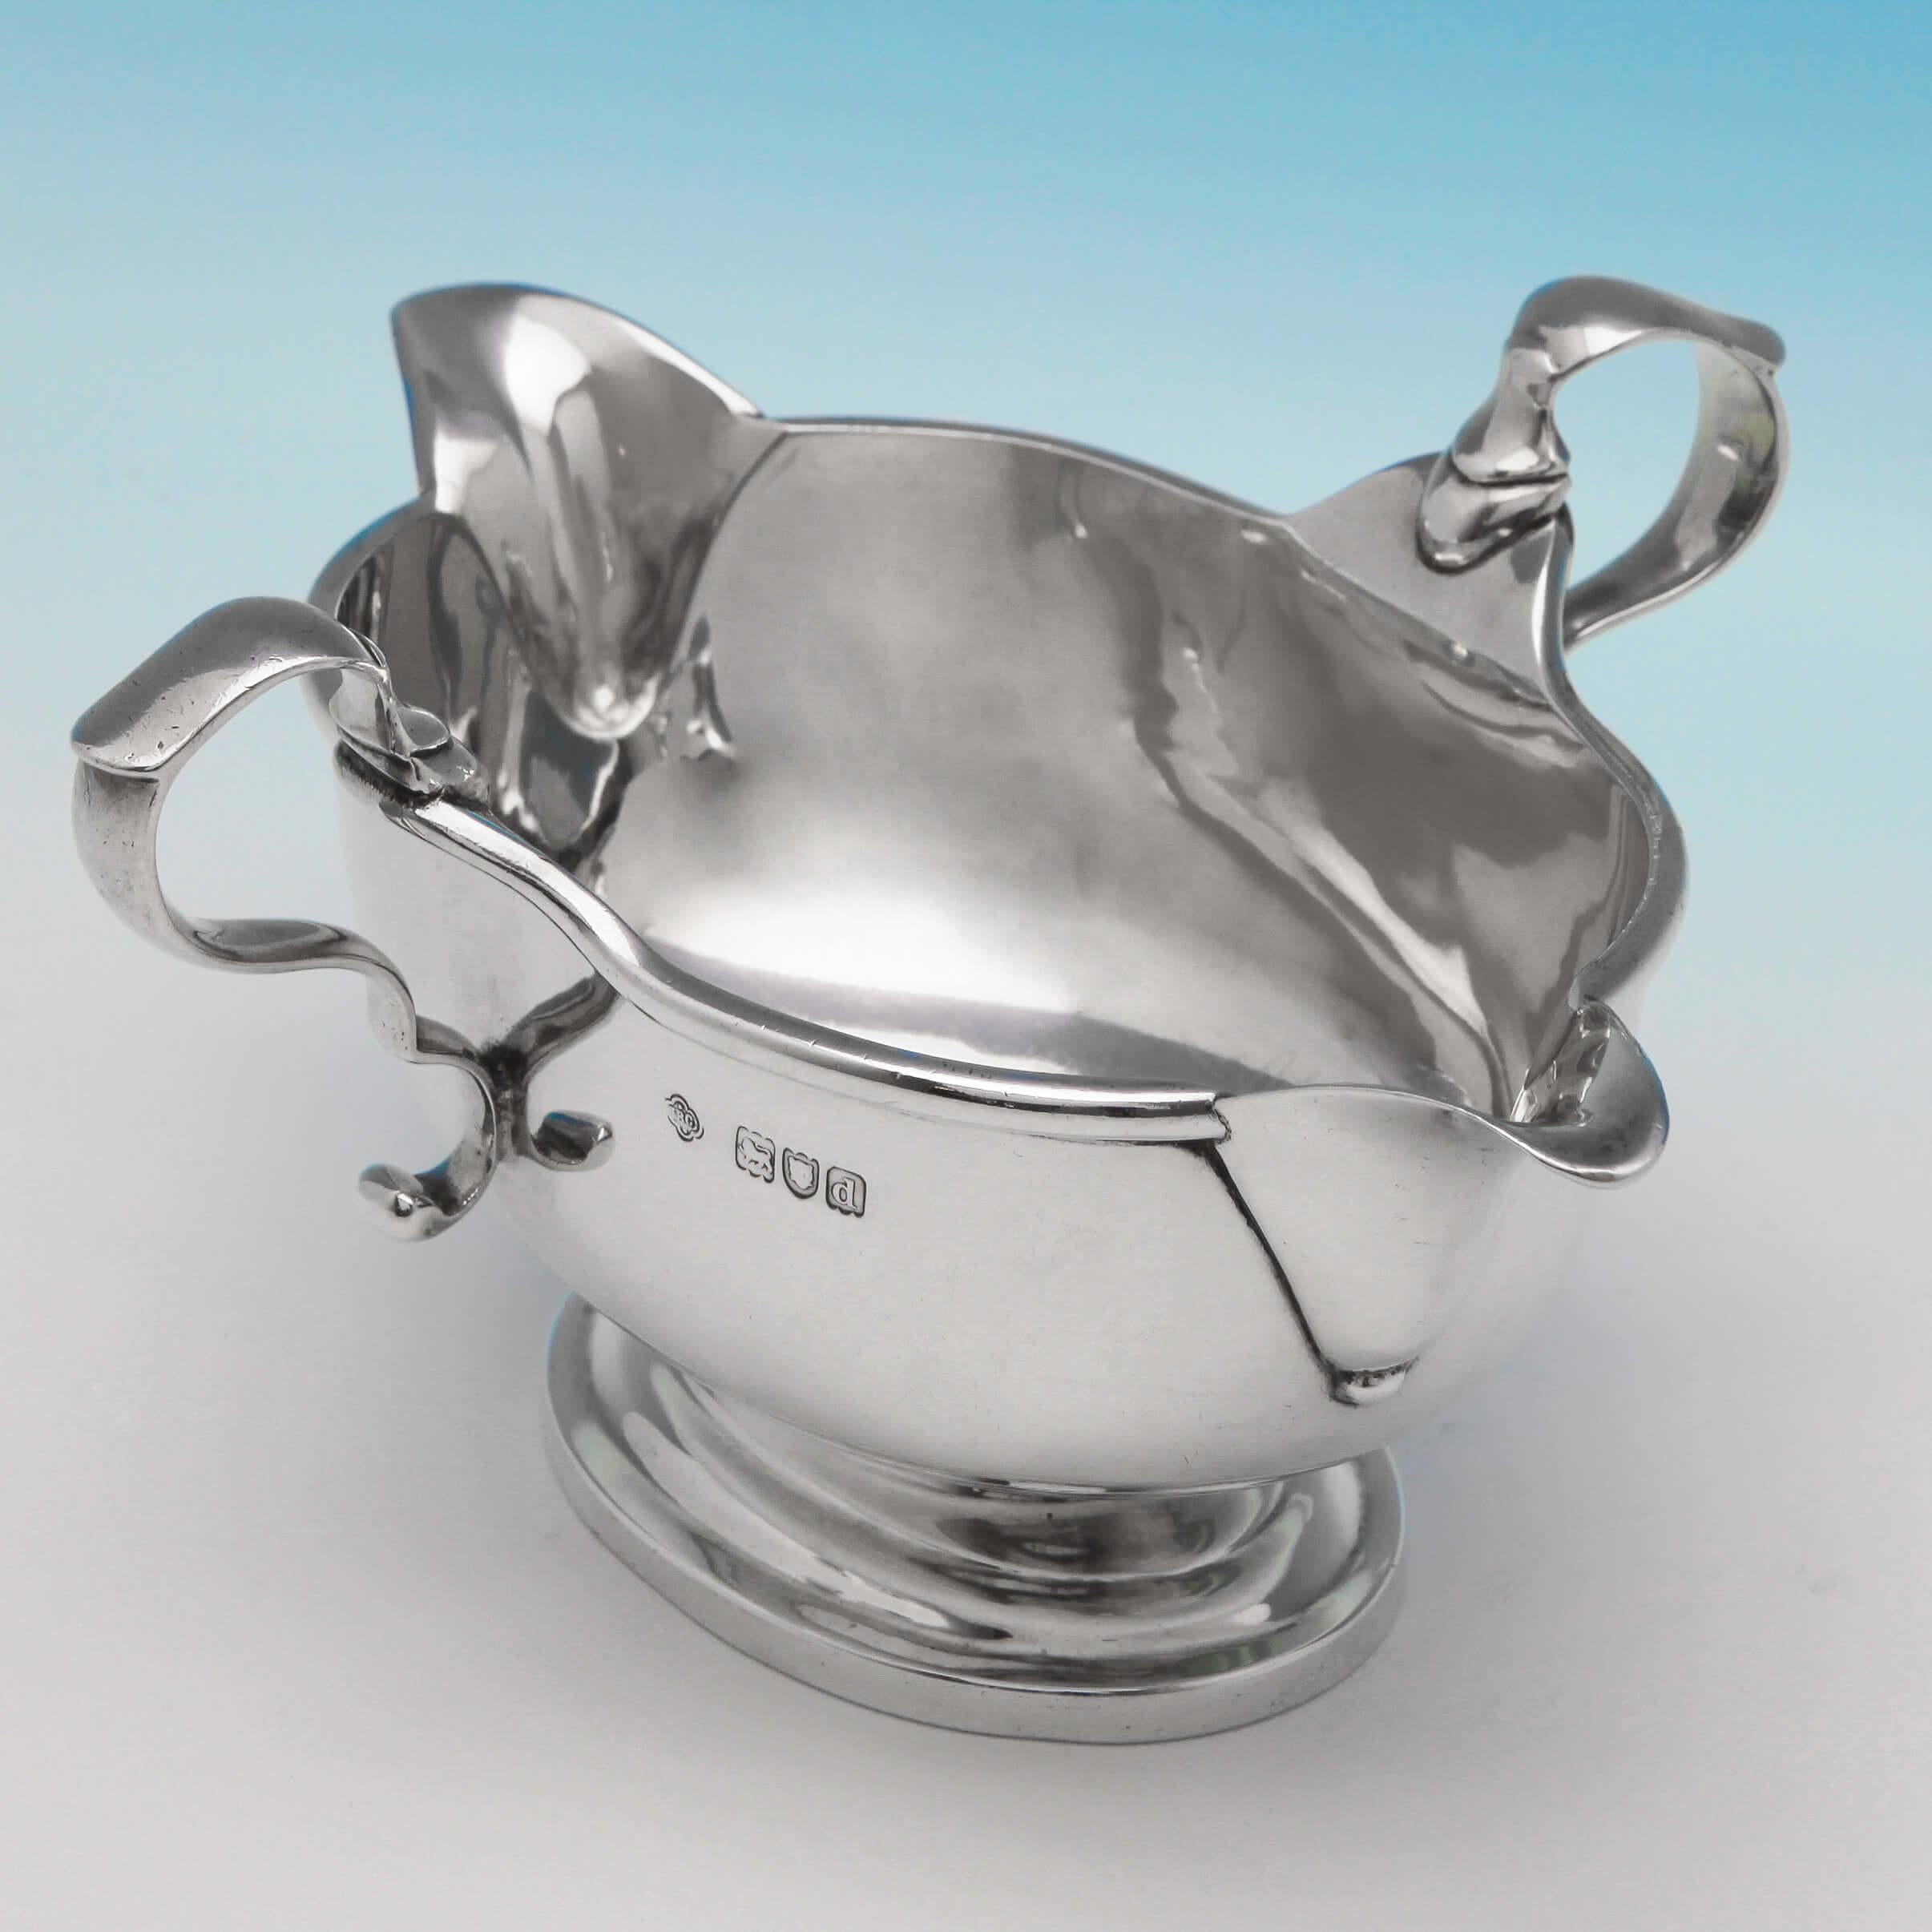 Hallmarked in London in 1899 by Carrington & Co., this handsome, Victorian, Antique Sterling Silver Sauce Boat, is plain in style, and double sided, replicating the original style of English silver sauce boats first seen during the 1690's. The sauce